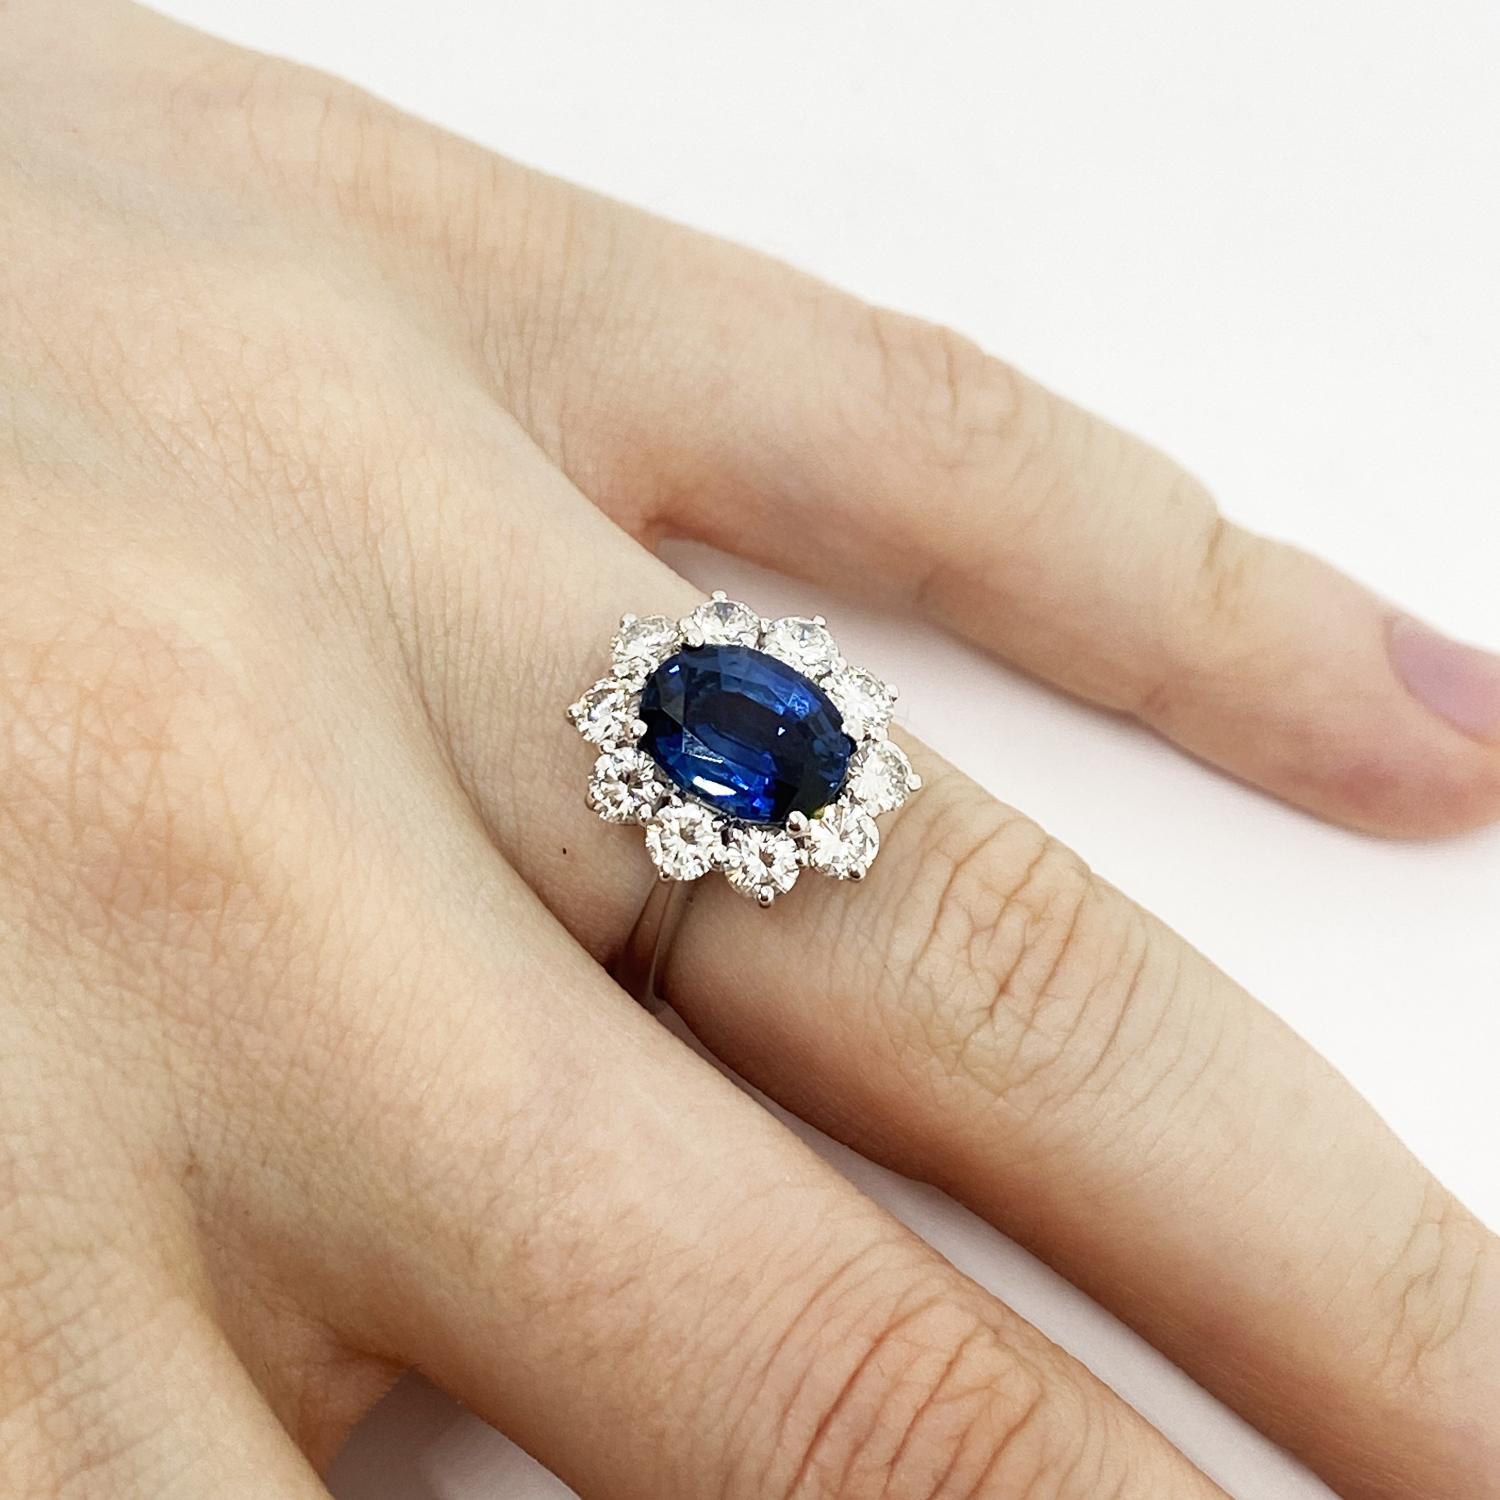 Ring made of 18kt white gold with natural white brilliant-cut diamonds for ct.1.33 and natural blue oval-cut sapphire for ct.2.90
-------------------------------------------------

Important Note : In order to speed up the publishing process of our